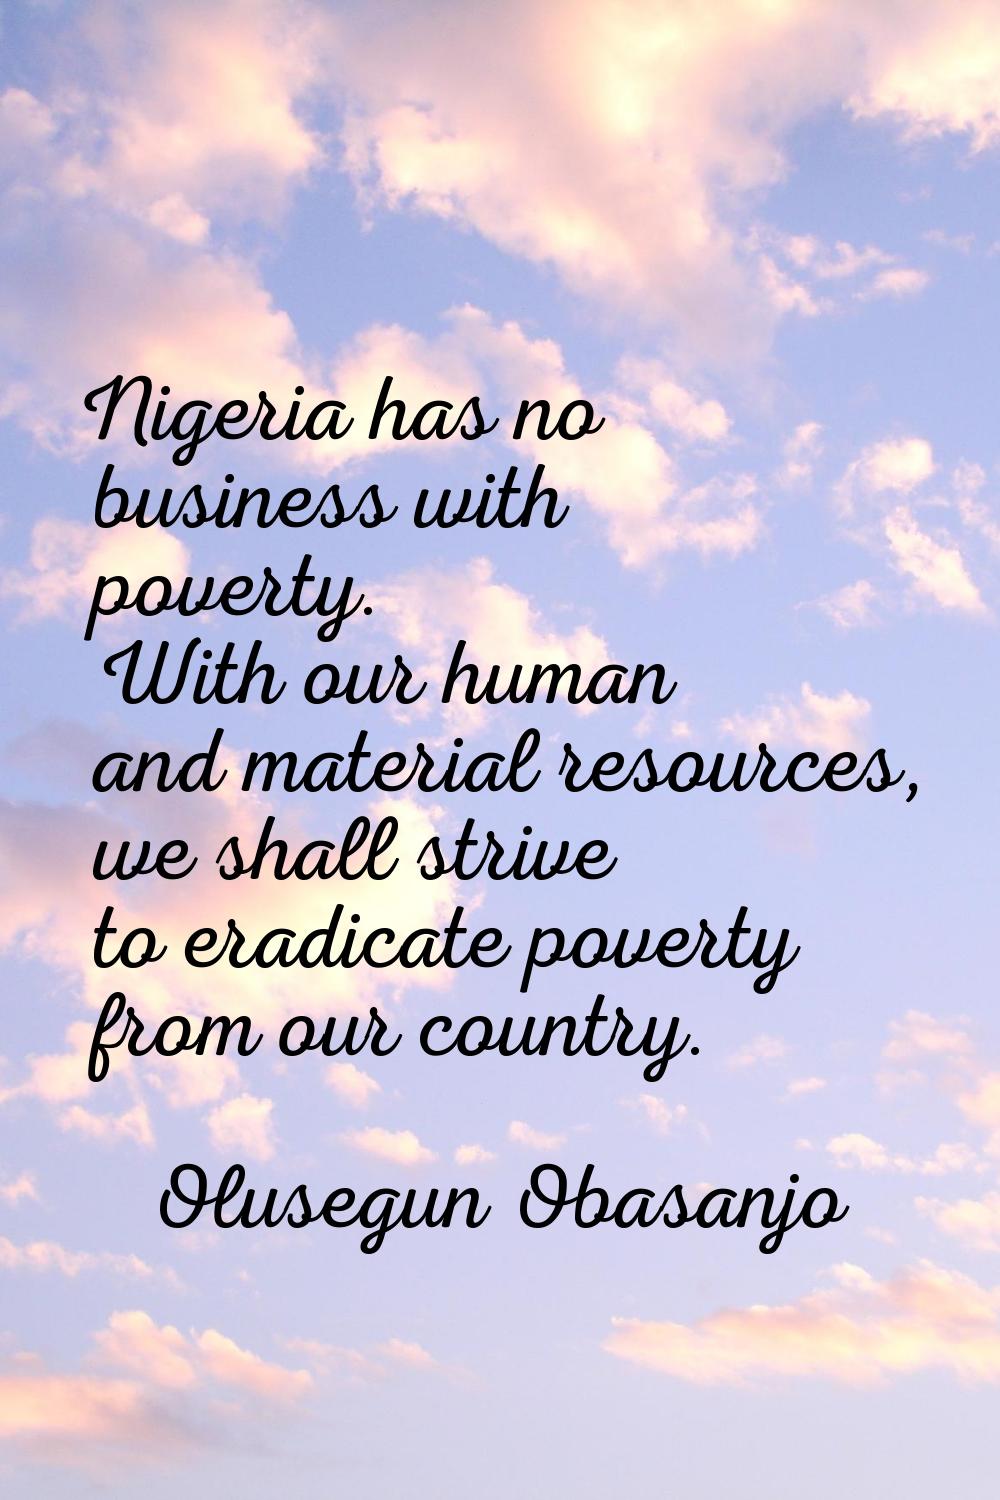 Nigeria has no business with poverty. With our human and material resources, we shall strive to era